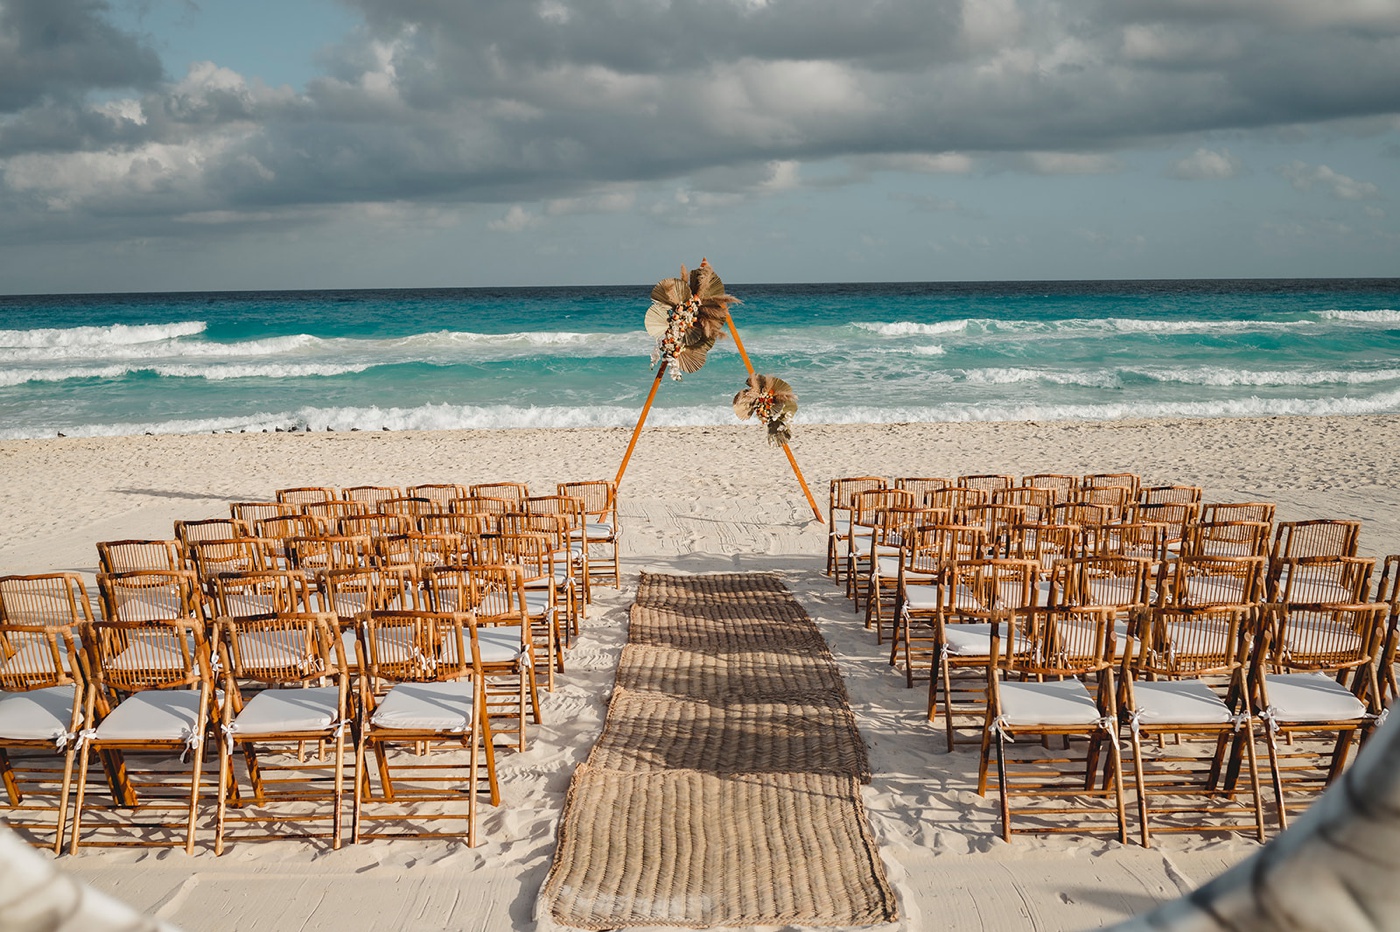 Beach wedding ceremony with a thatched aisle runner and triangle arch